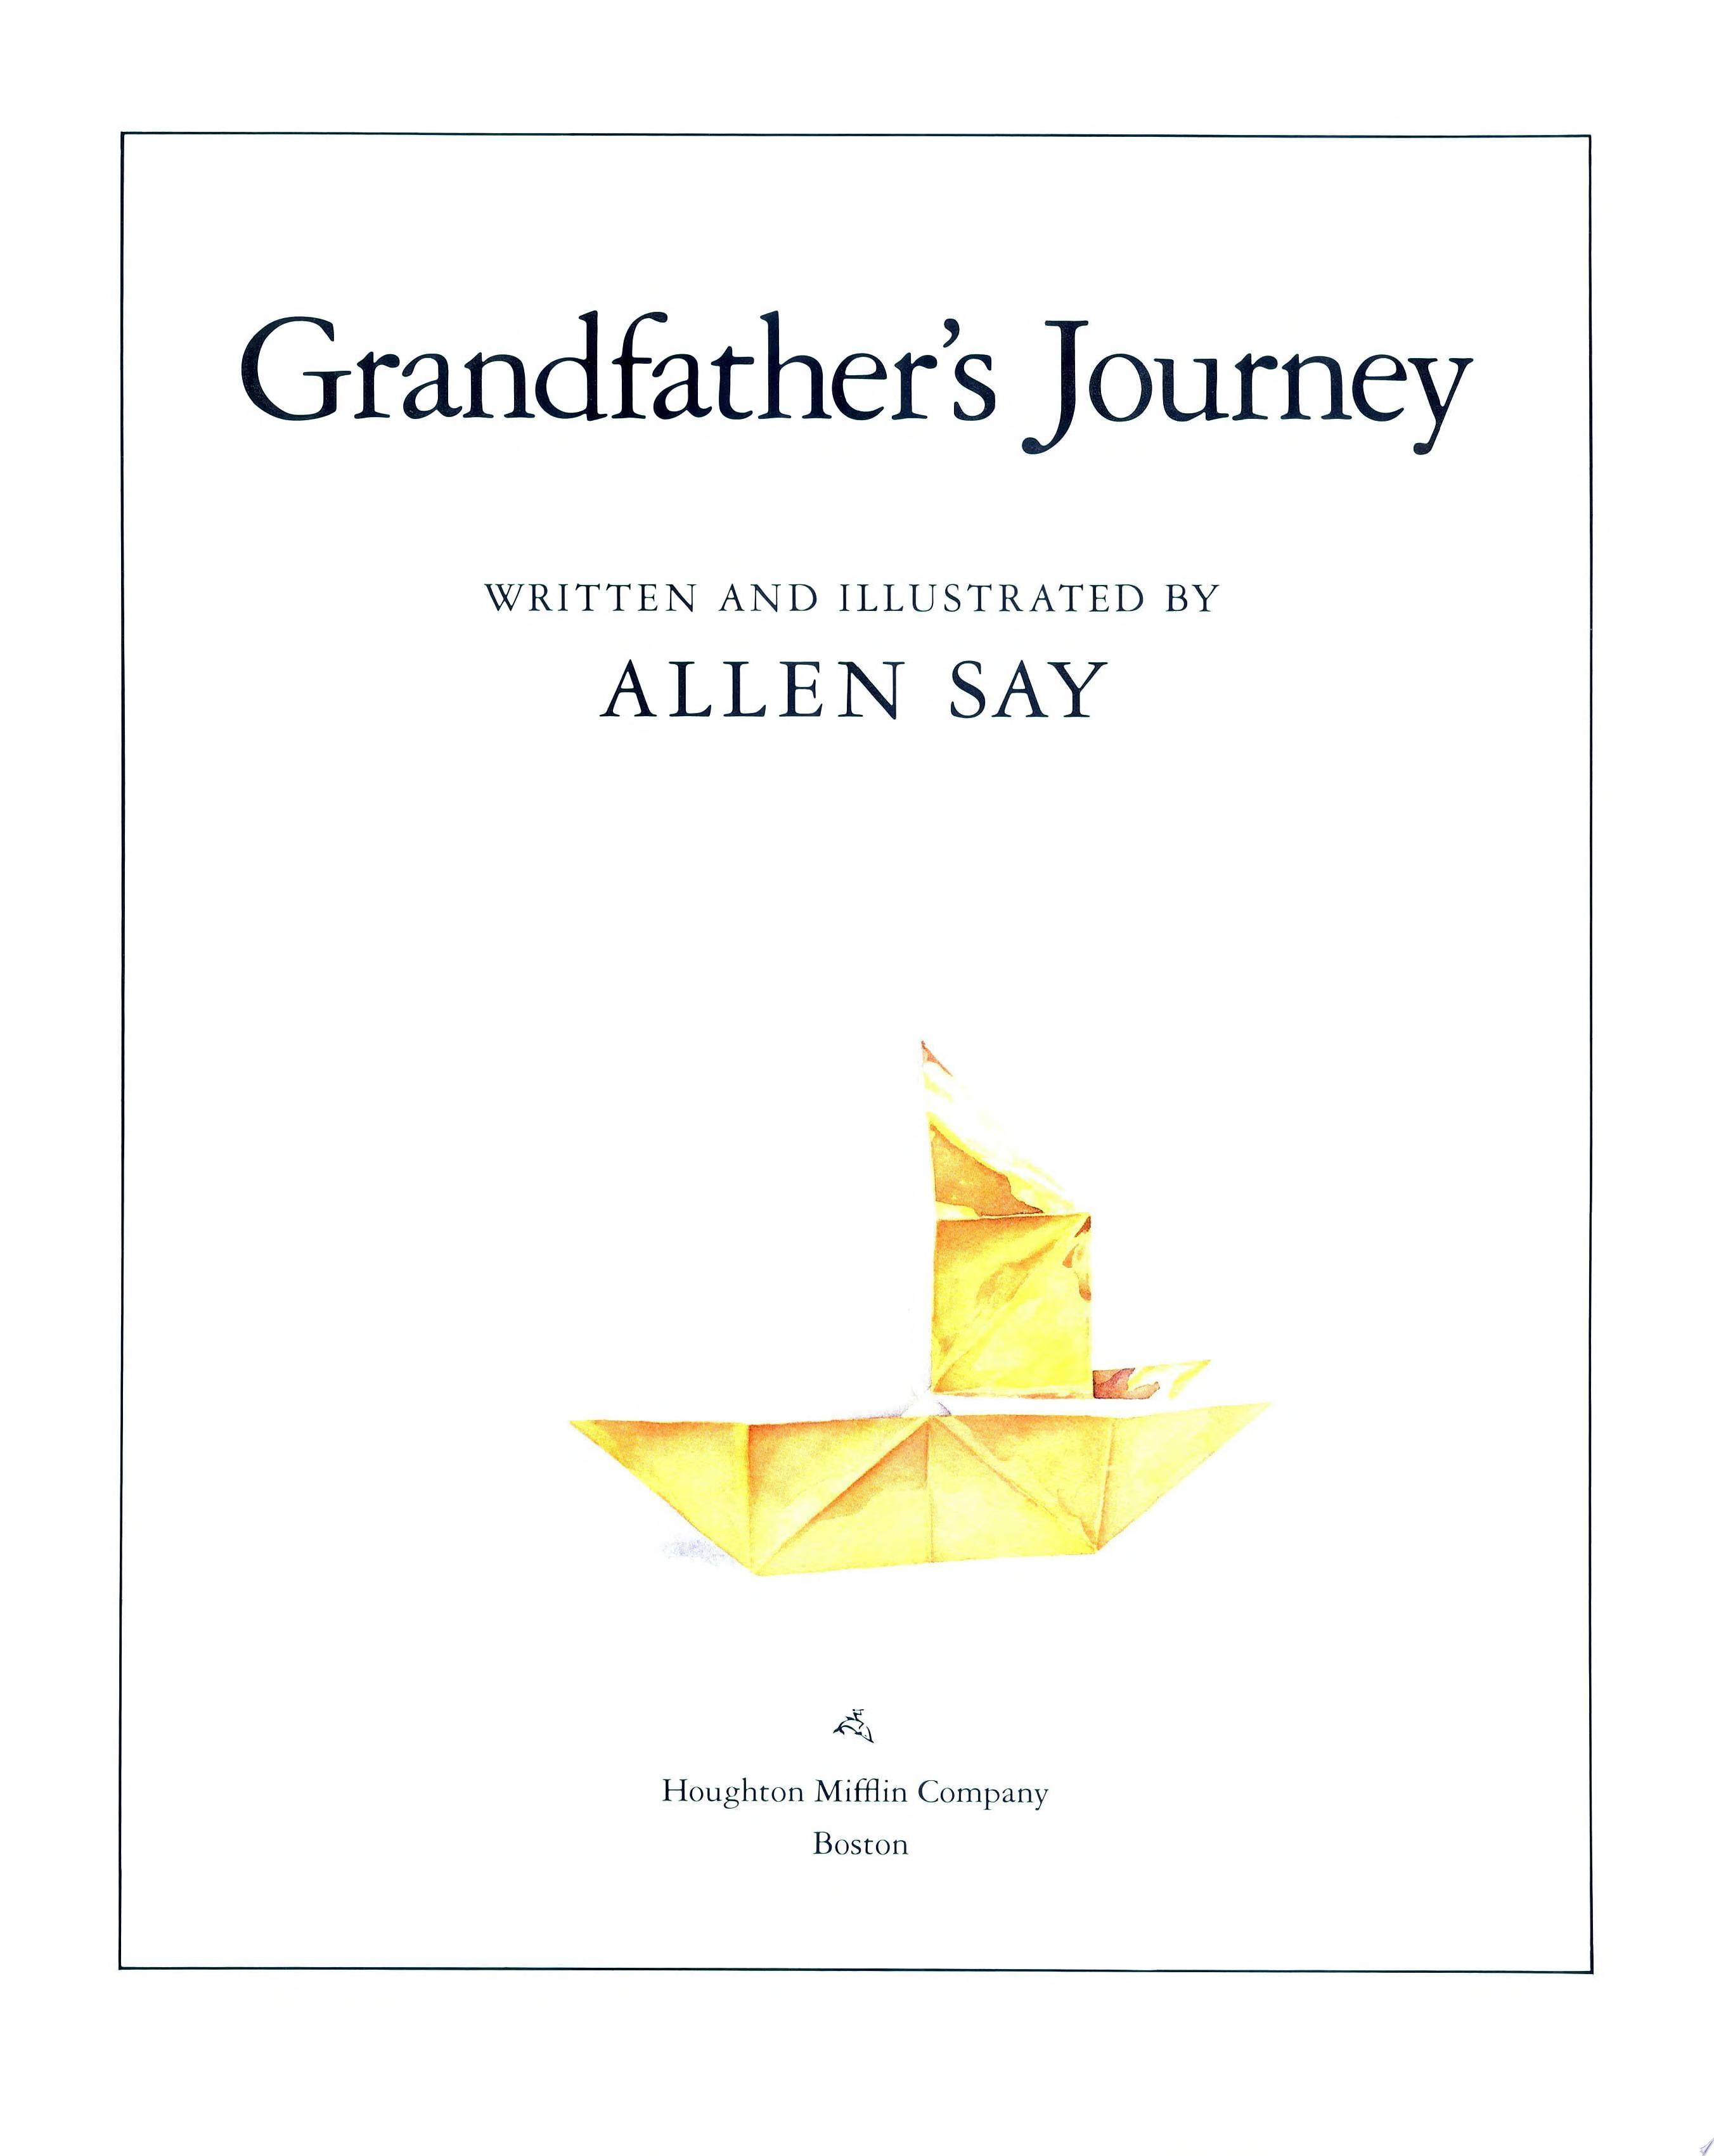 Image for "Grandfather's Journey"